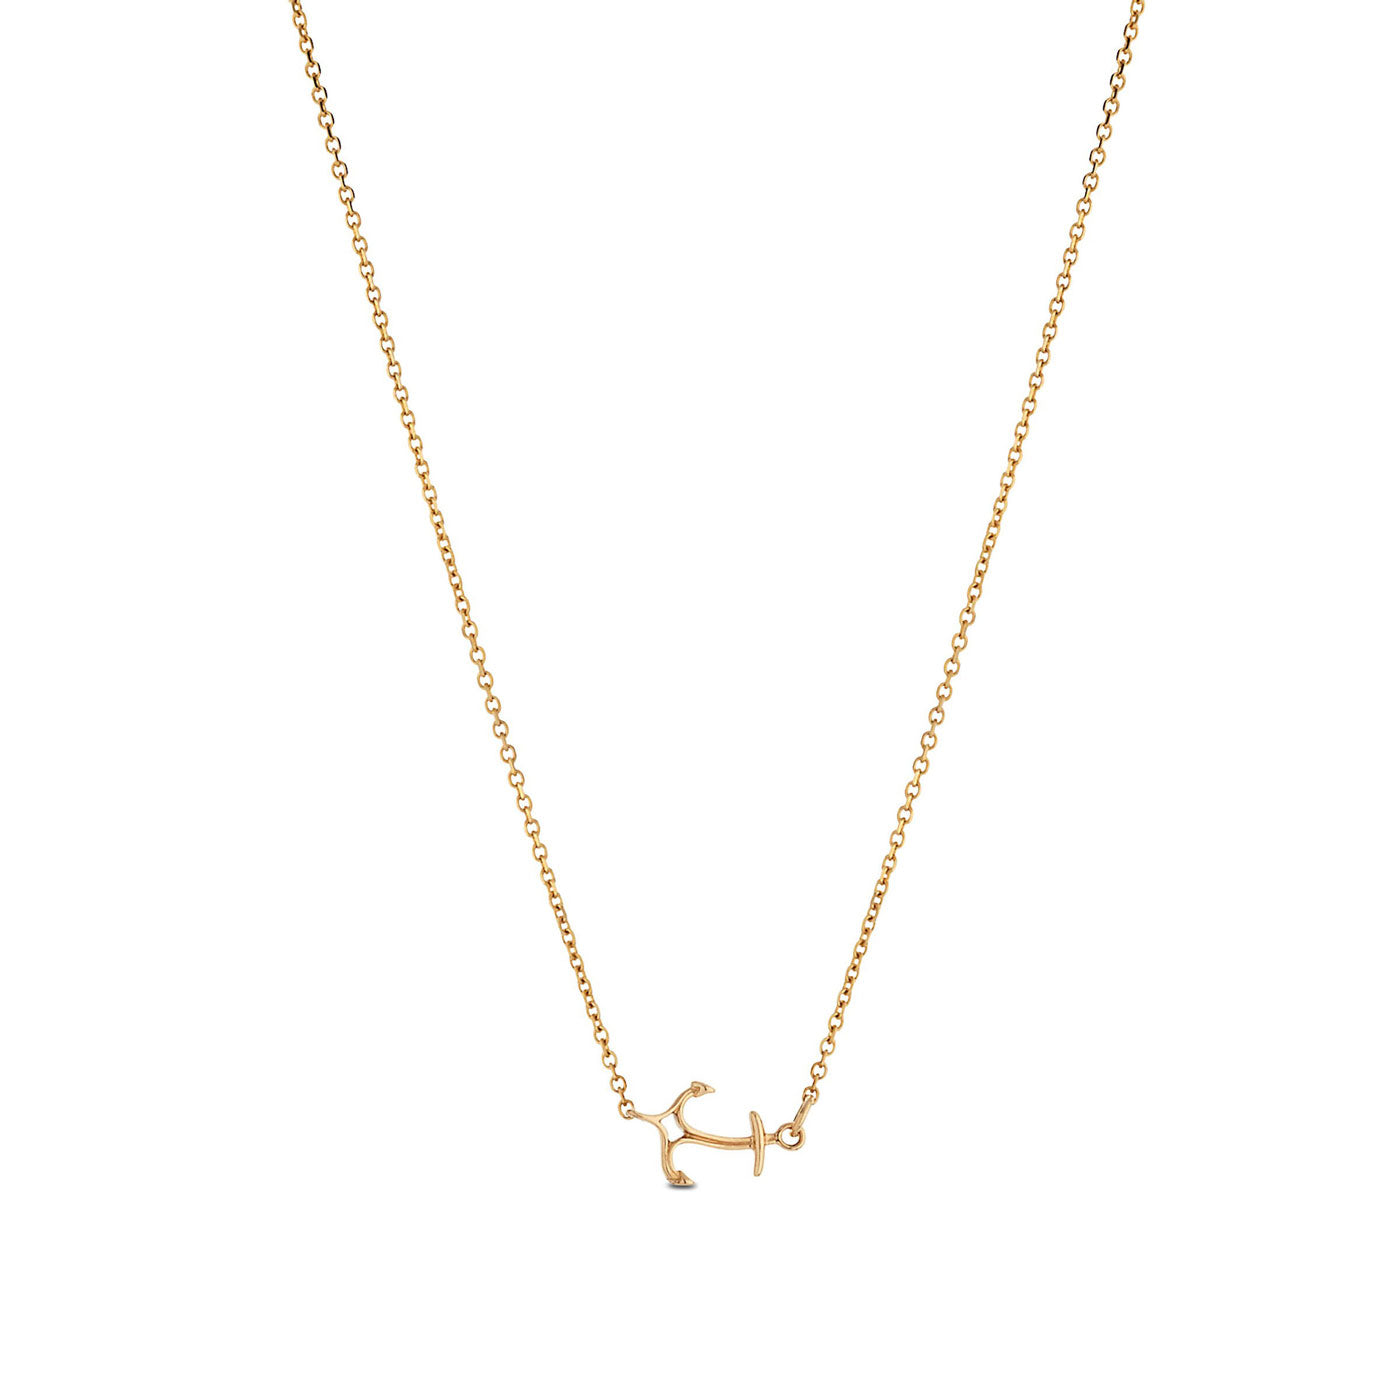 Bixlers Nautical Curved Anchor Necklace In 14k Gold